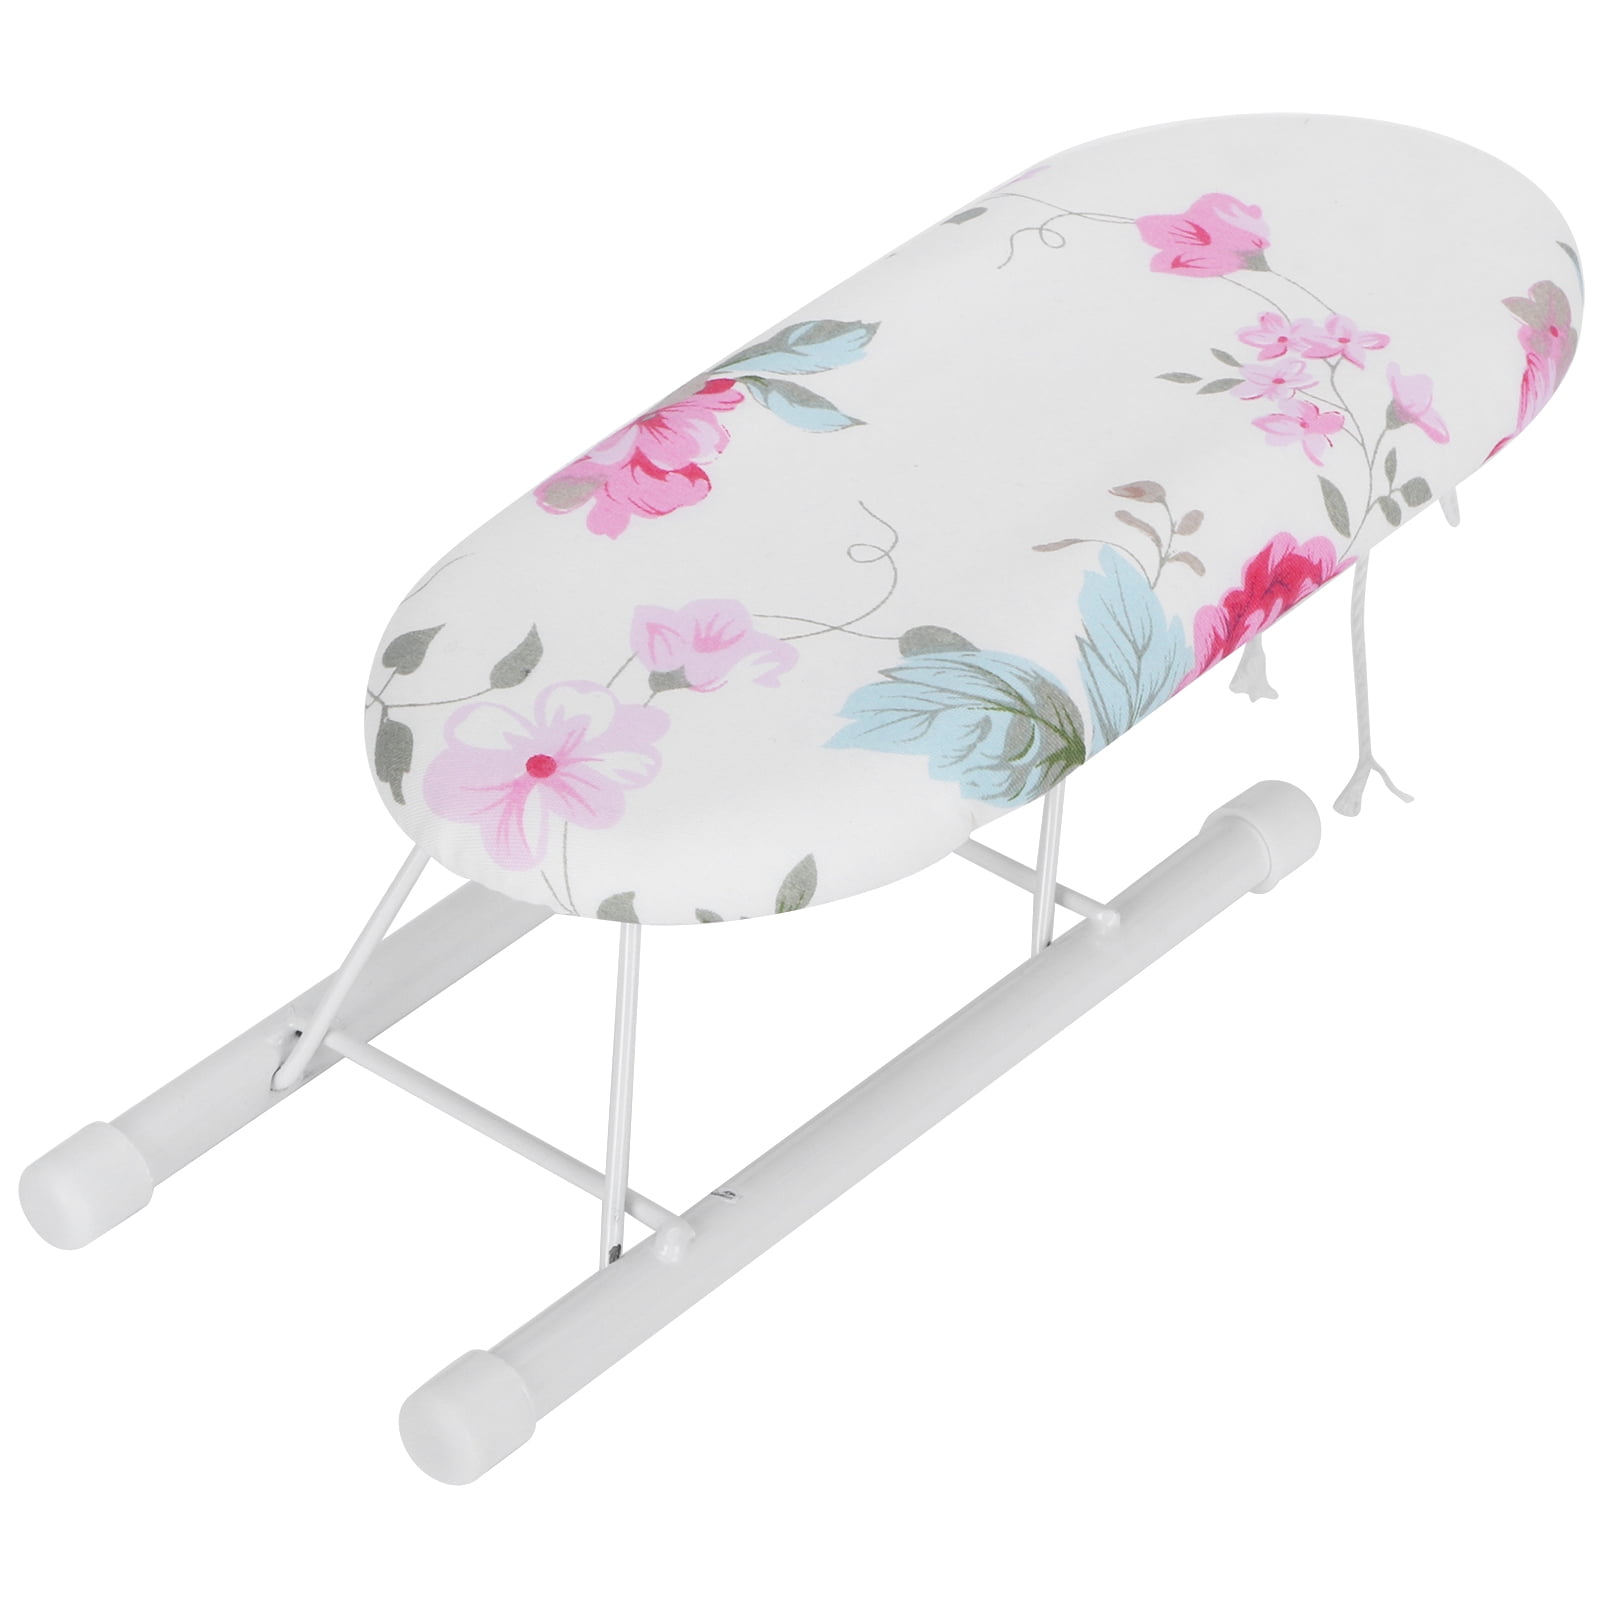 Details about   Latest Ironing Board Home Foldable Clothes Sleeve Cuffs Mini Table Saving Space 